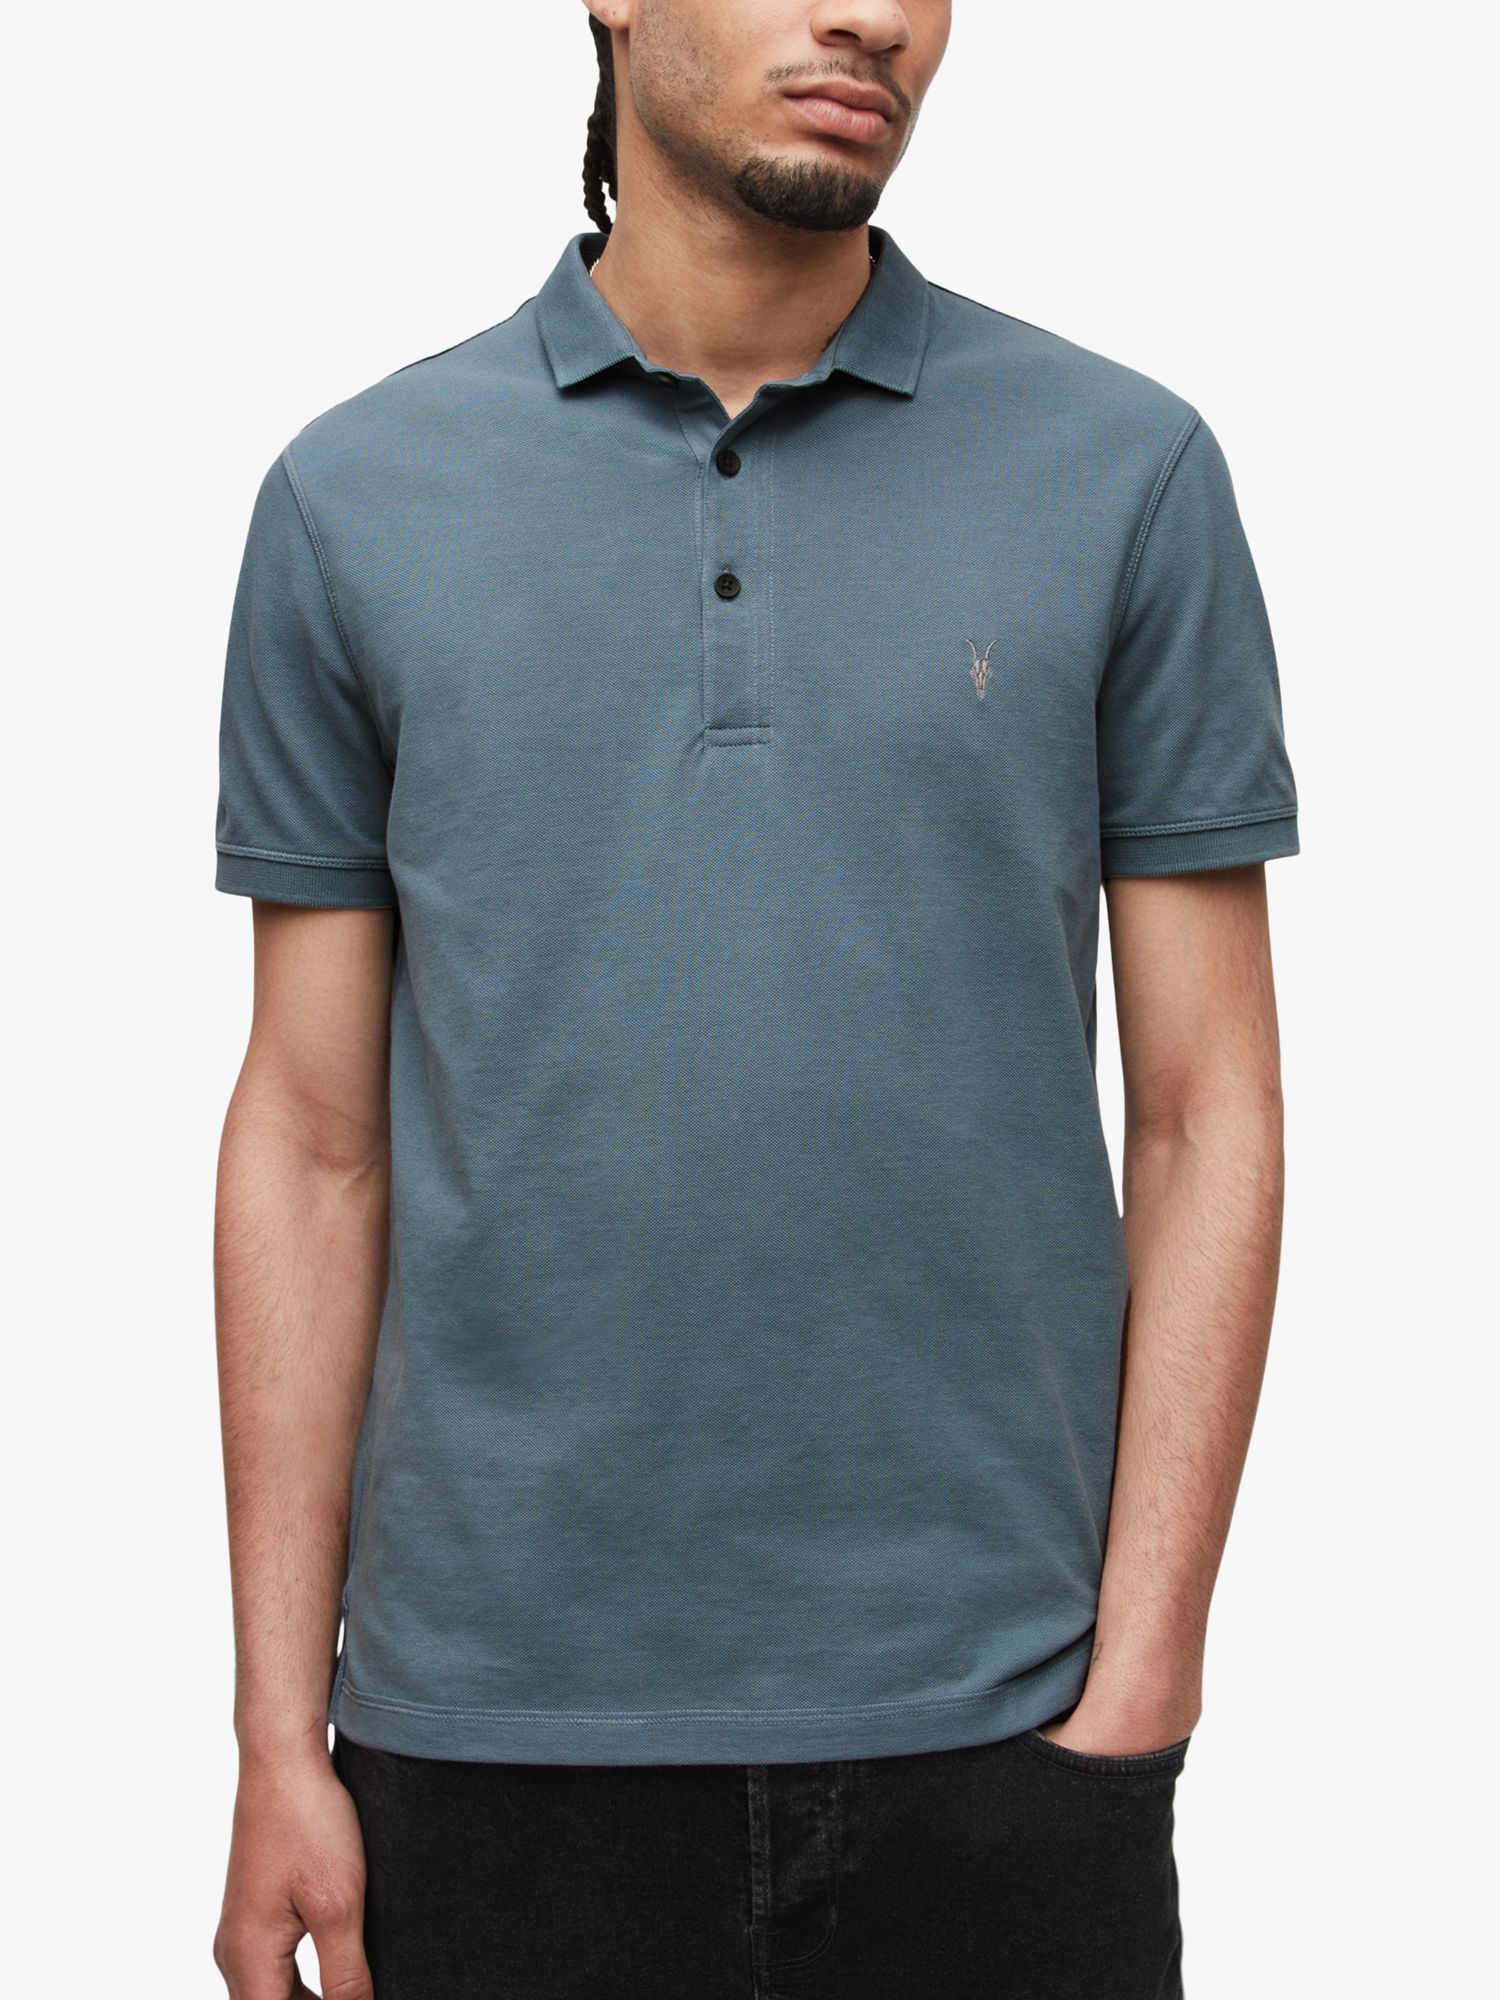 AllSaints Reform Short Sleeve Polo Top, Aged Blue at John Lewis & Partners